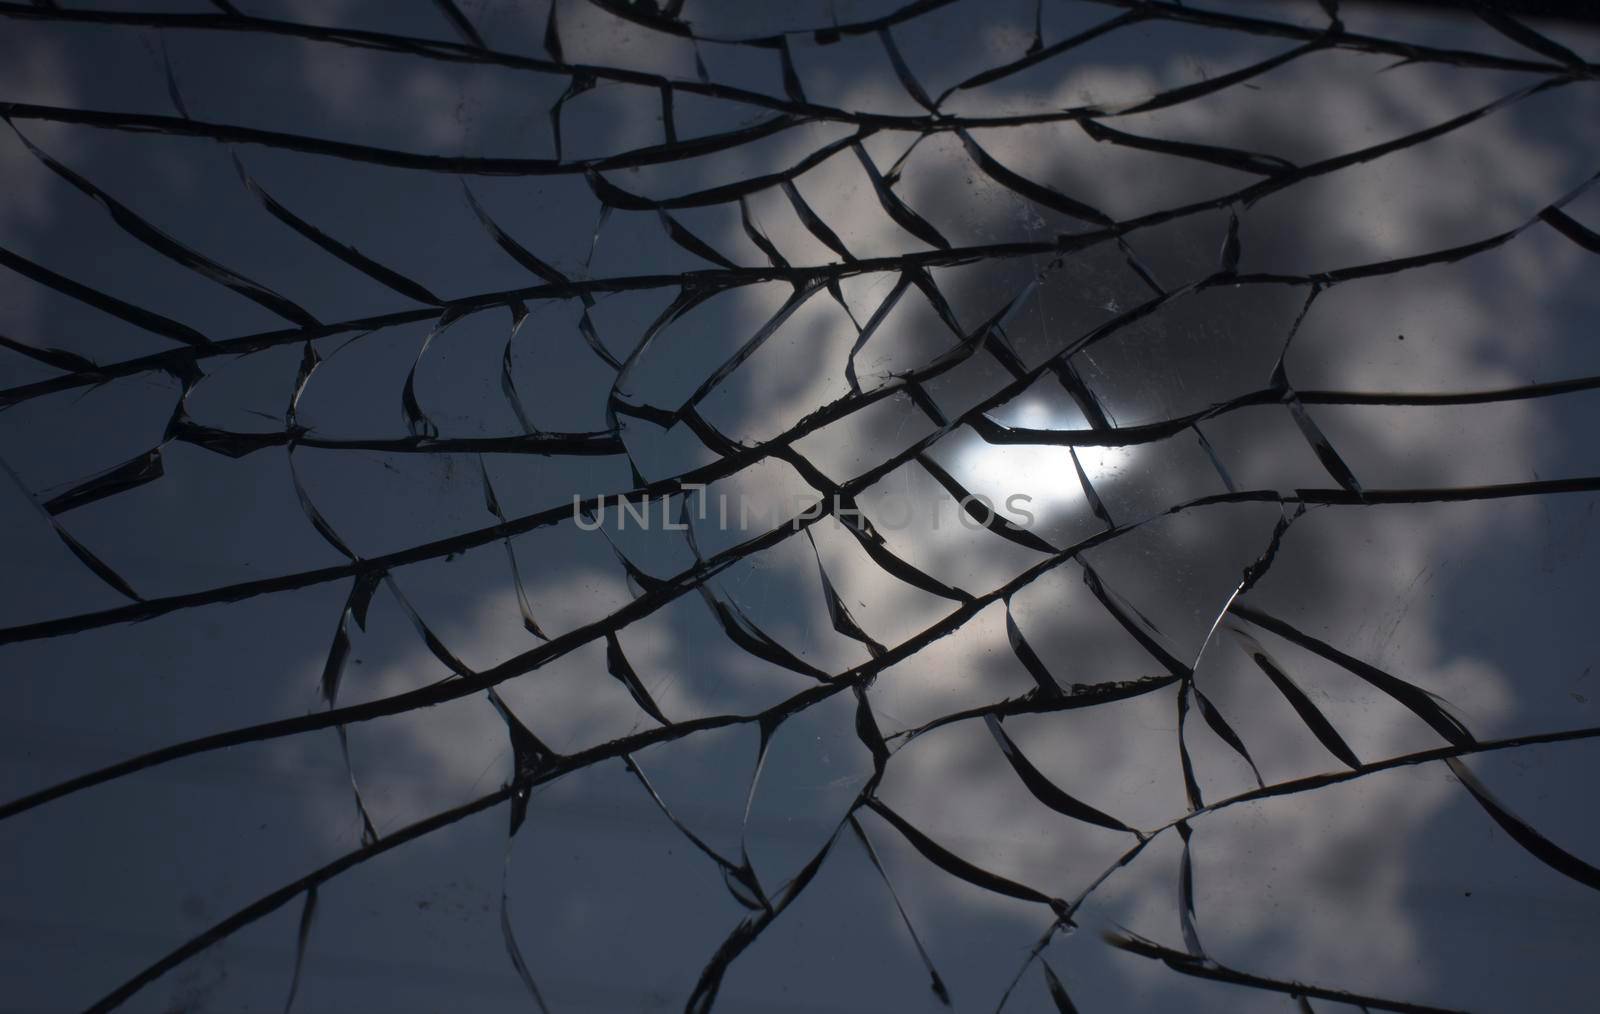 Broken glass with cracks on blue sky background. Close up view of broken glass texture